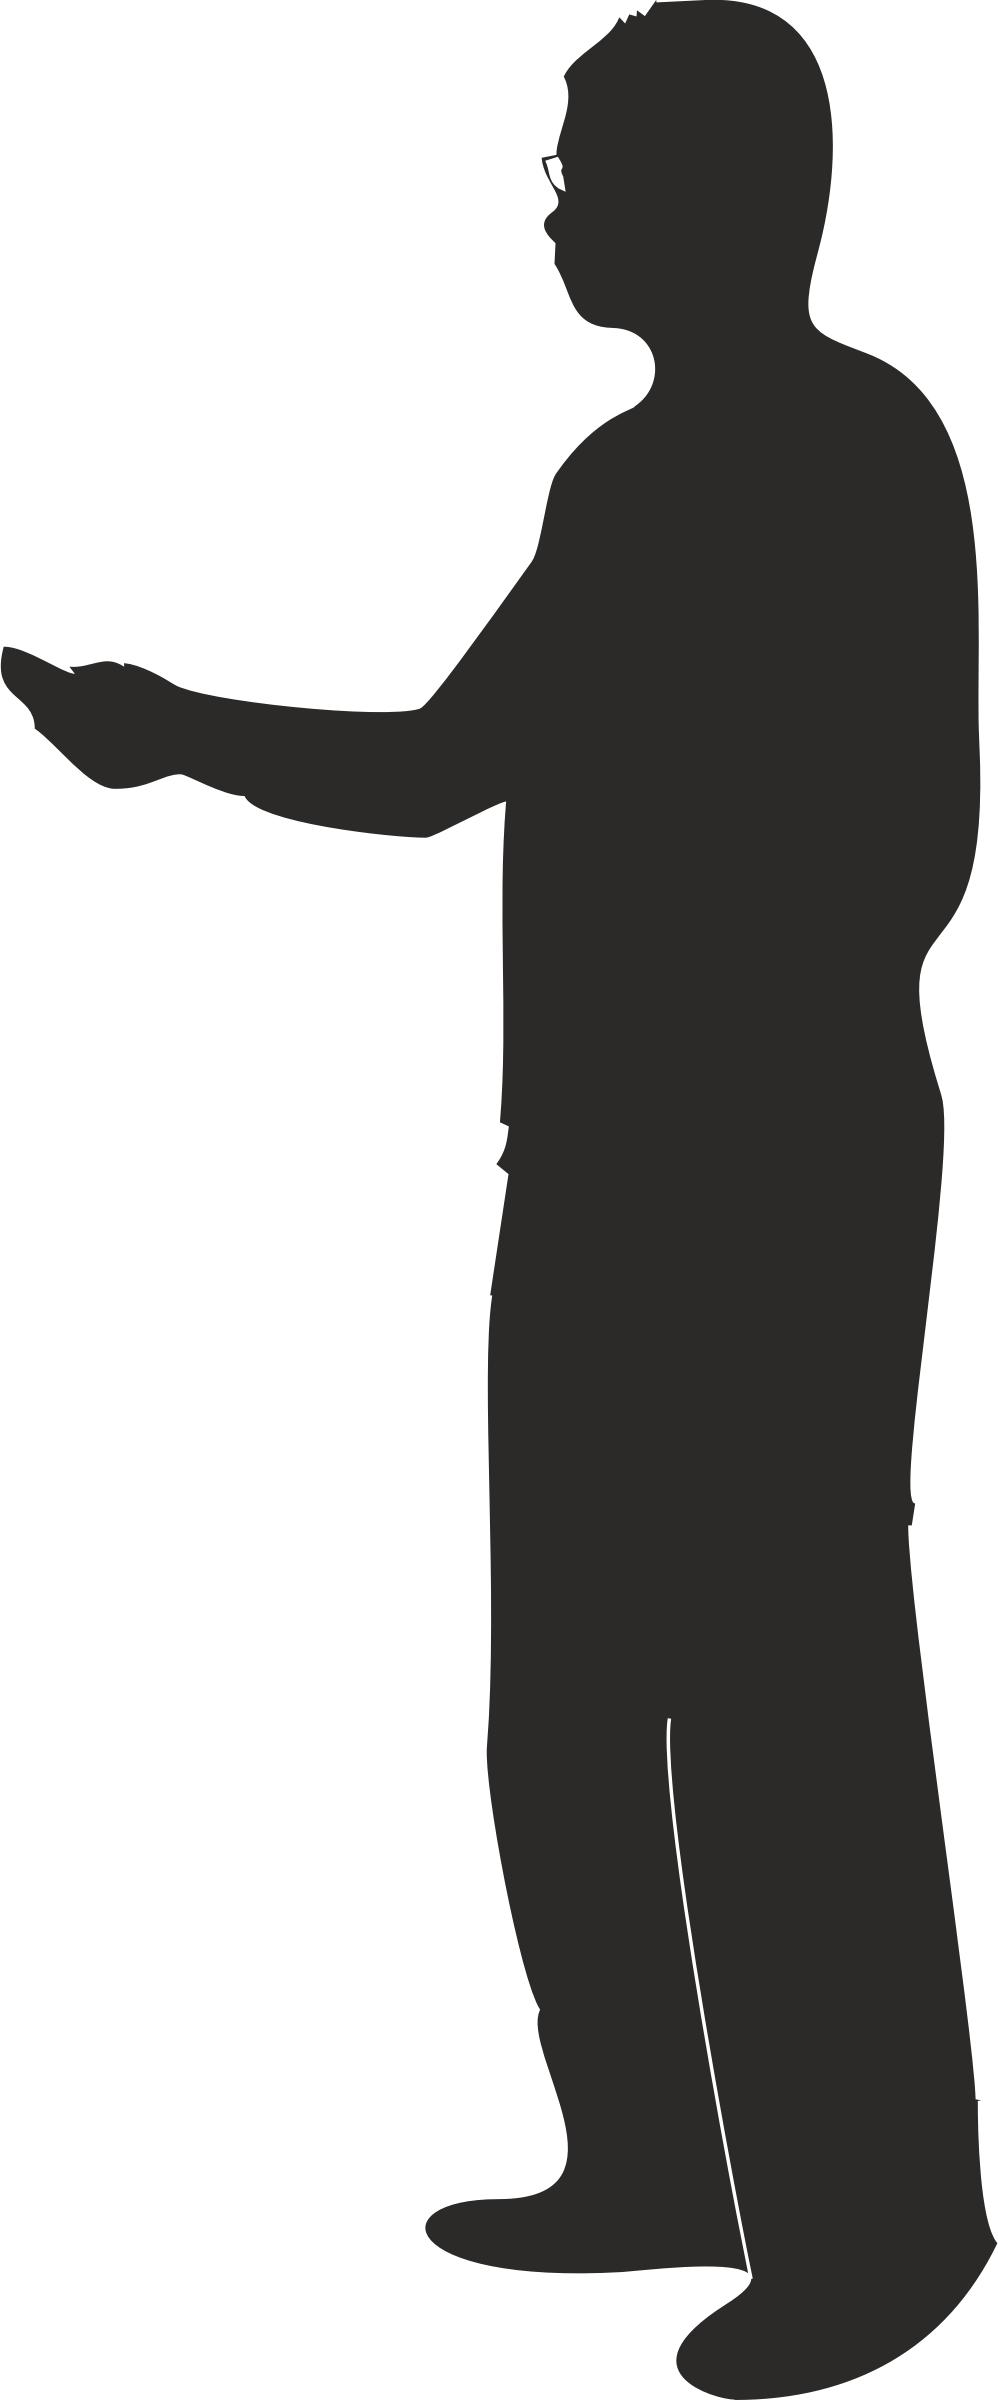 Male silhouette presenting or pointing icons